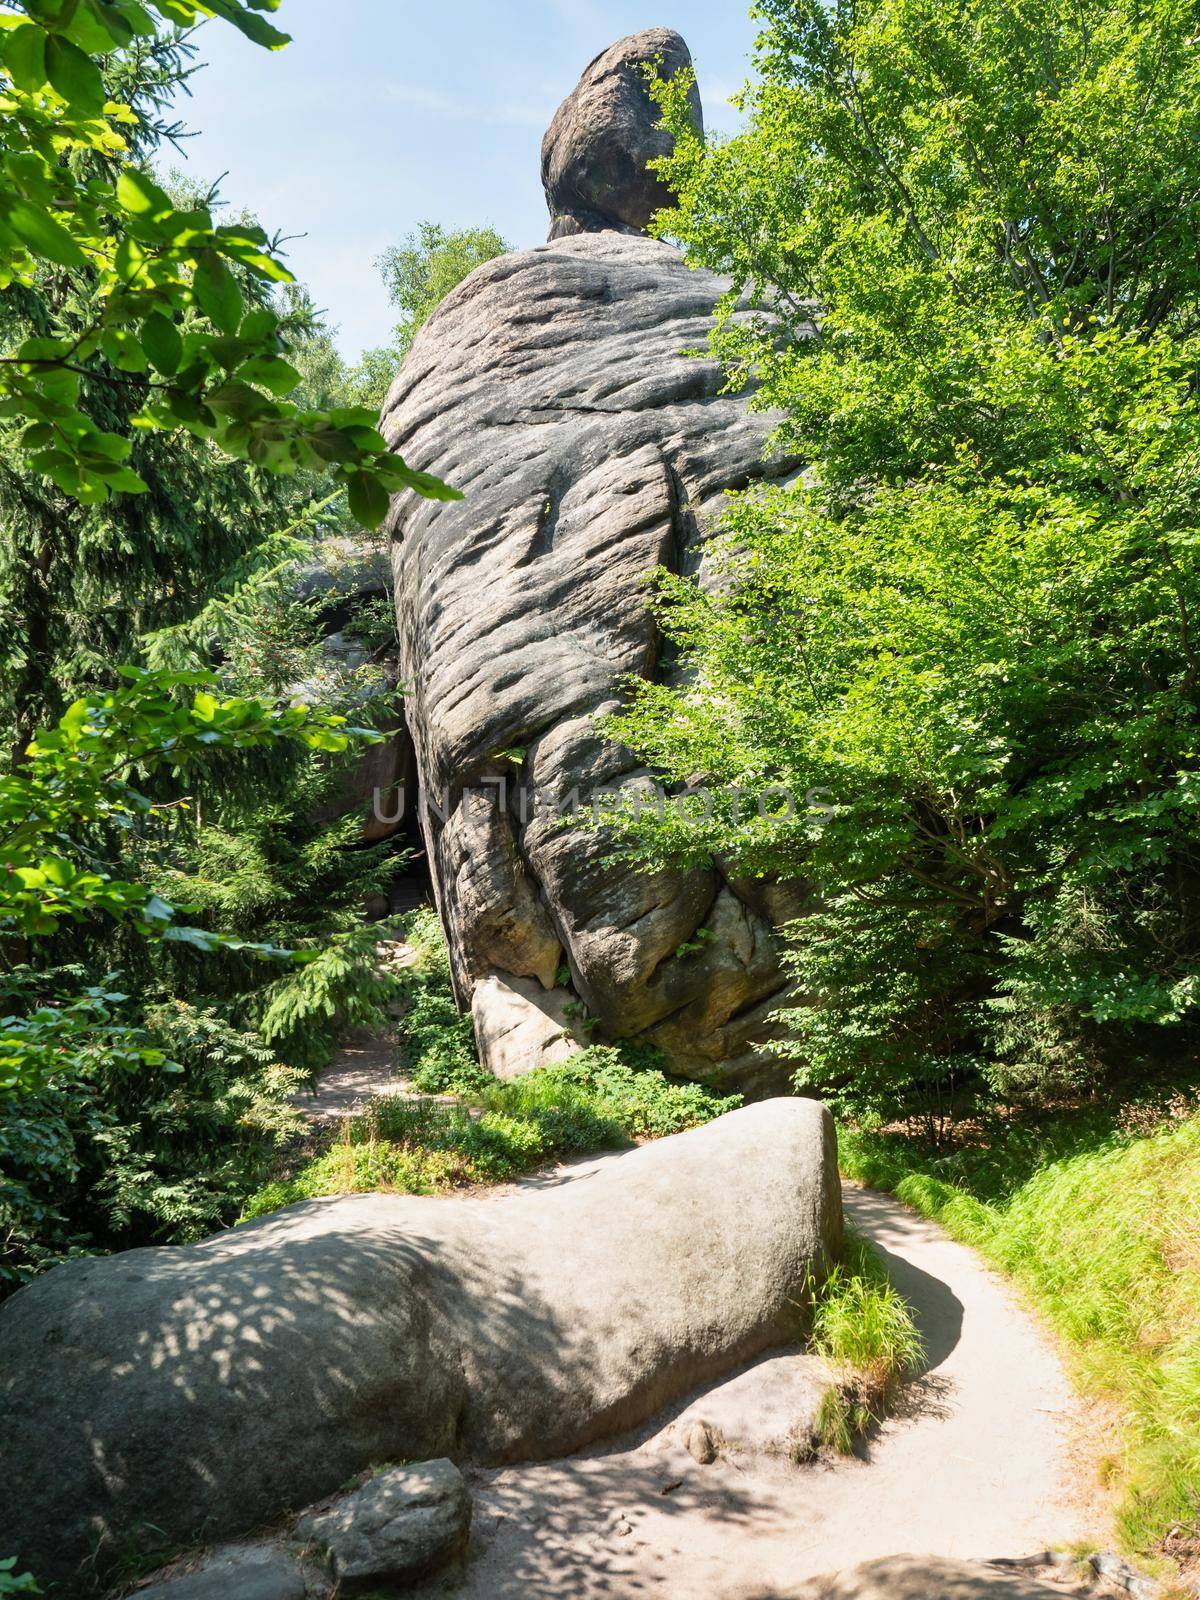 The Fat man rock. The symbol of stony guardian at tourist path to Hvezda chapel, Broumovske wall, stony labyrinth at north of Czechia.